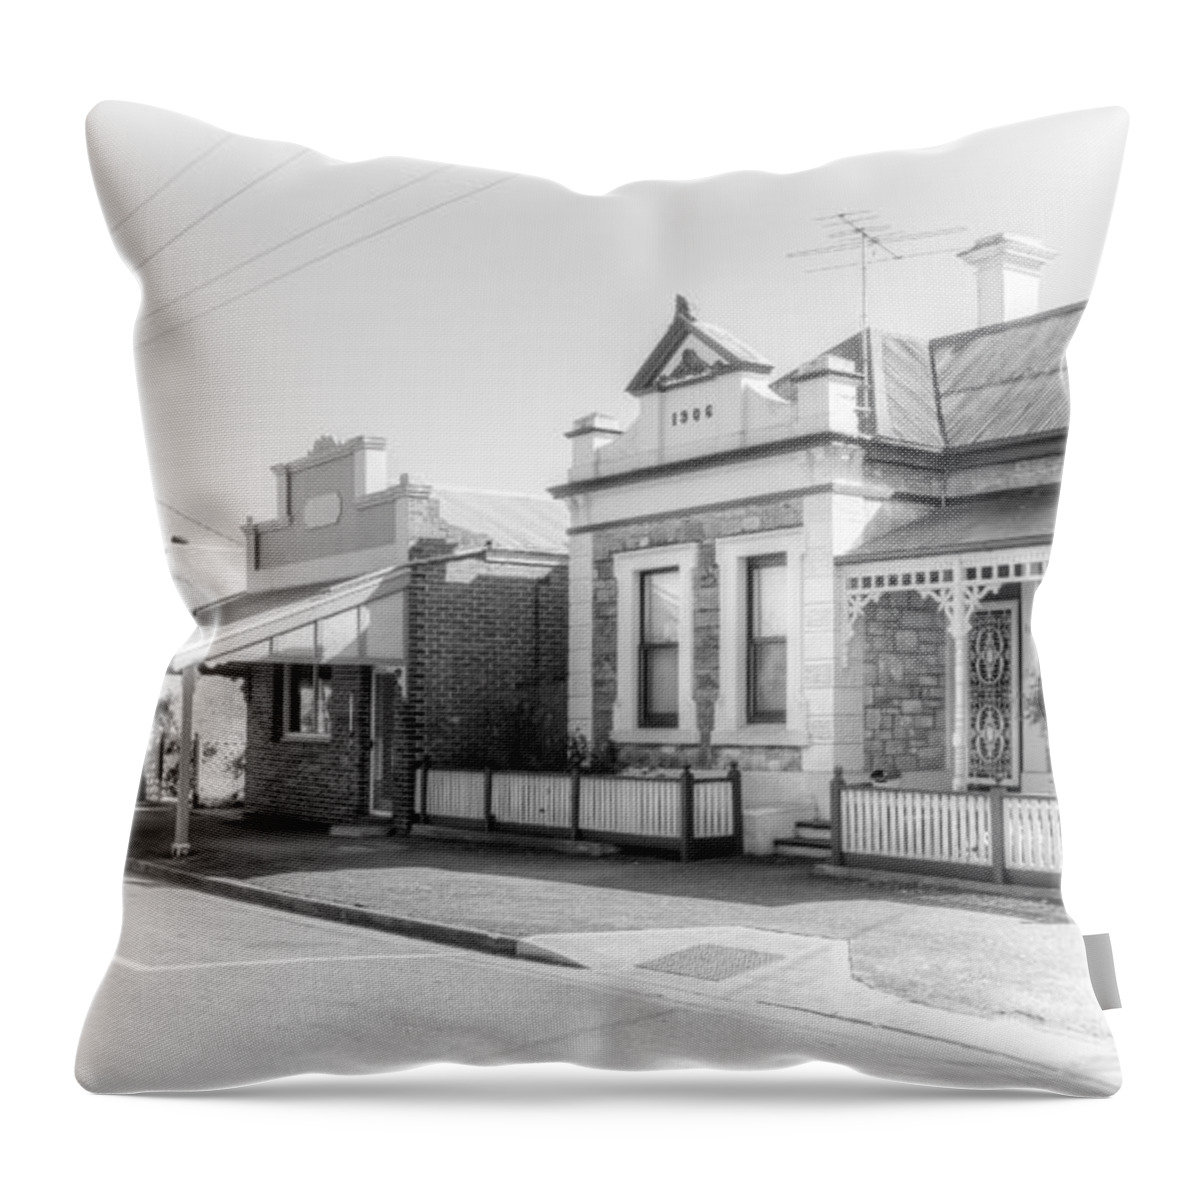 Old-time Charm Throw Pillow featuring the photograph Old-time Charm by Wayne Sherriff